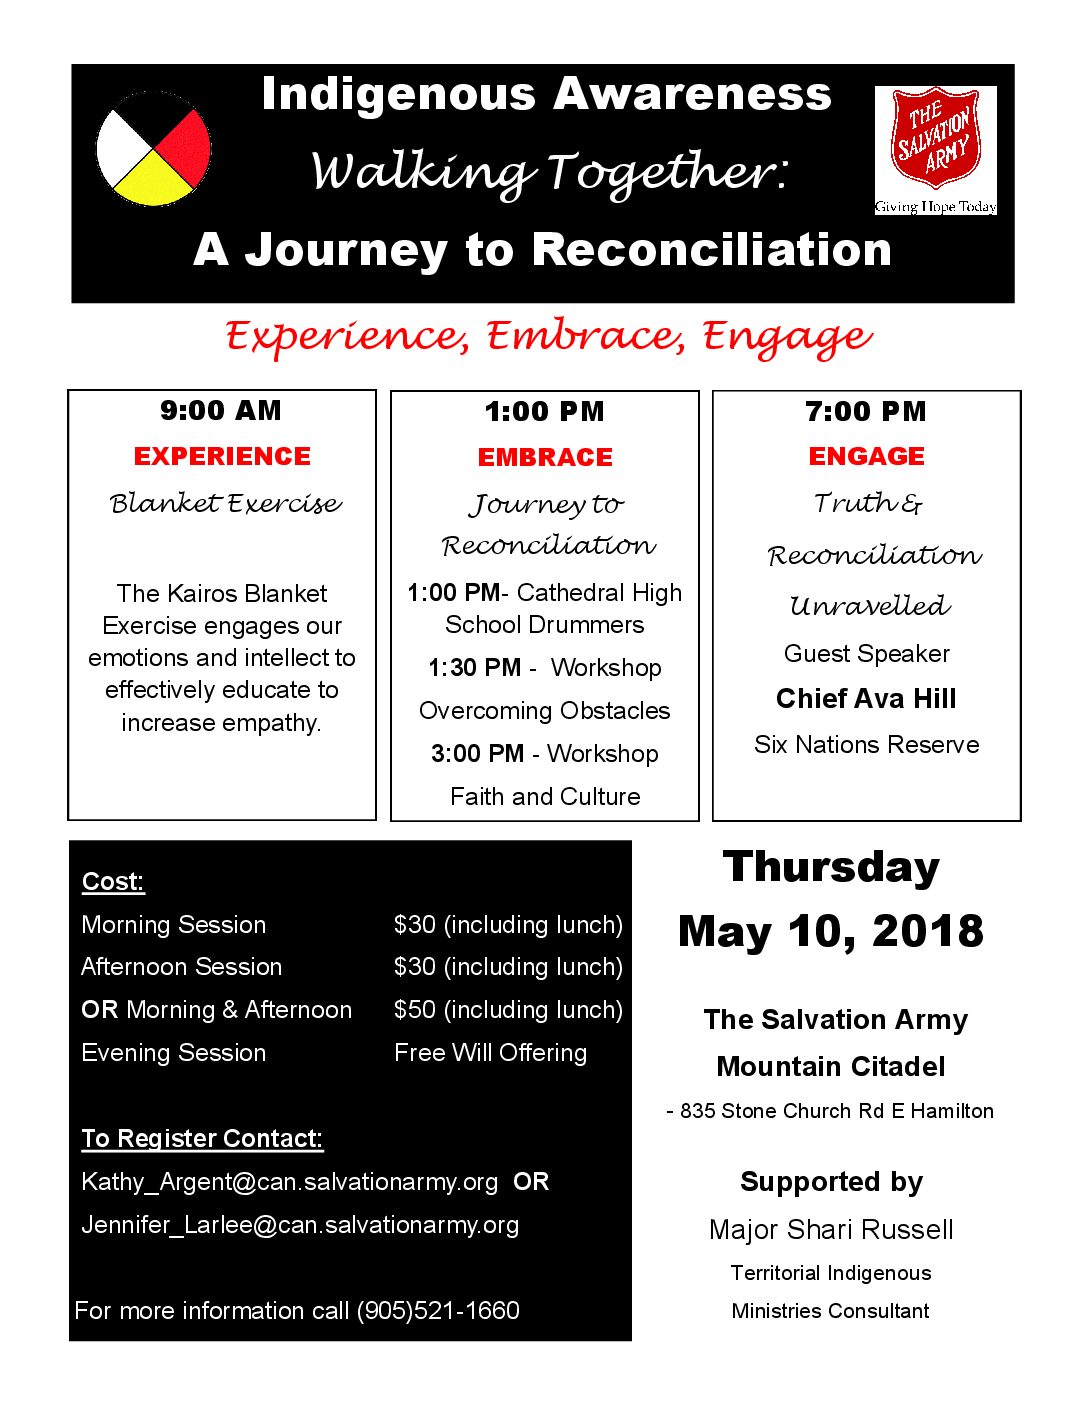 Indigenous-Awareness-A-Journey-to-Reconciliation-Poster-1-pdf